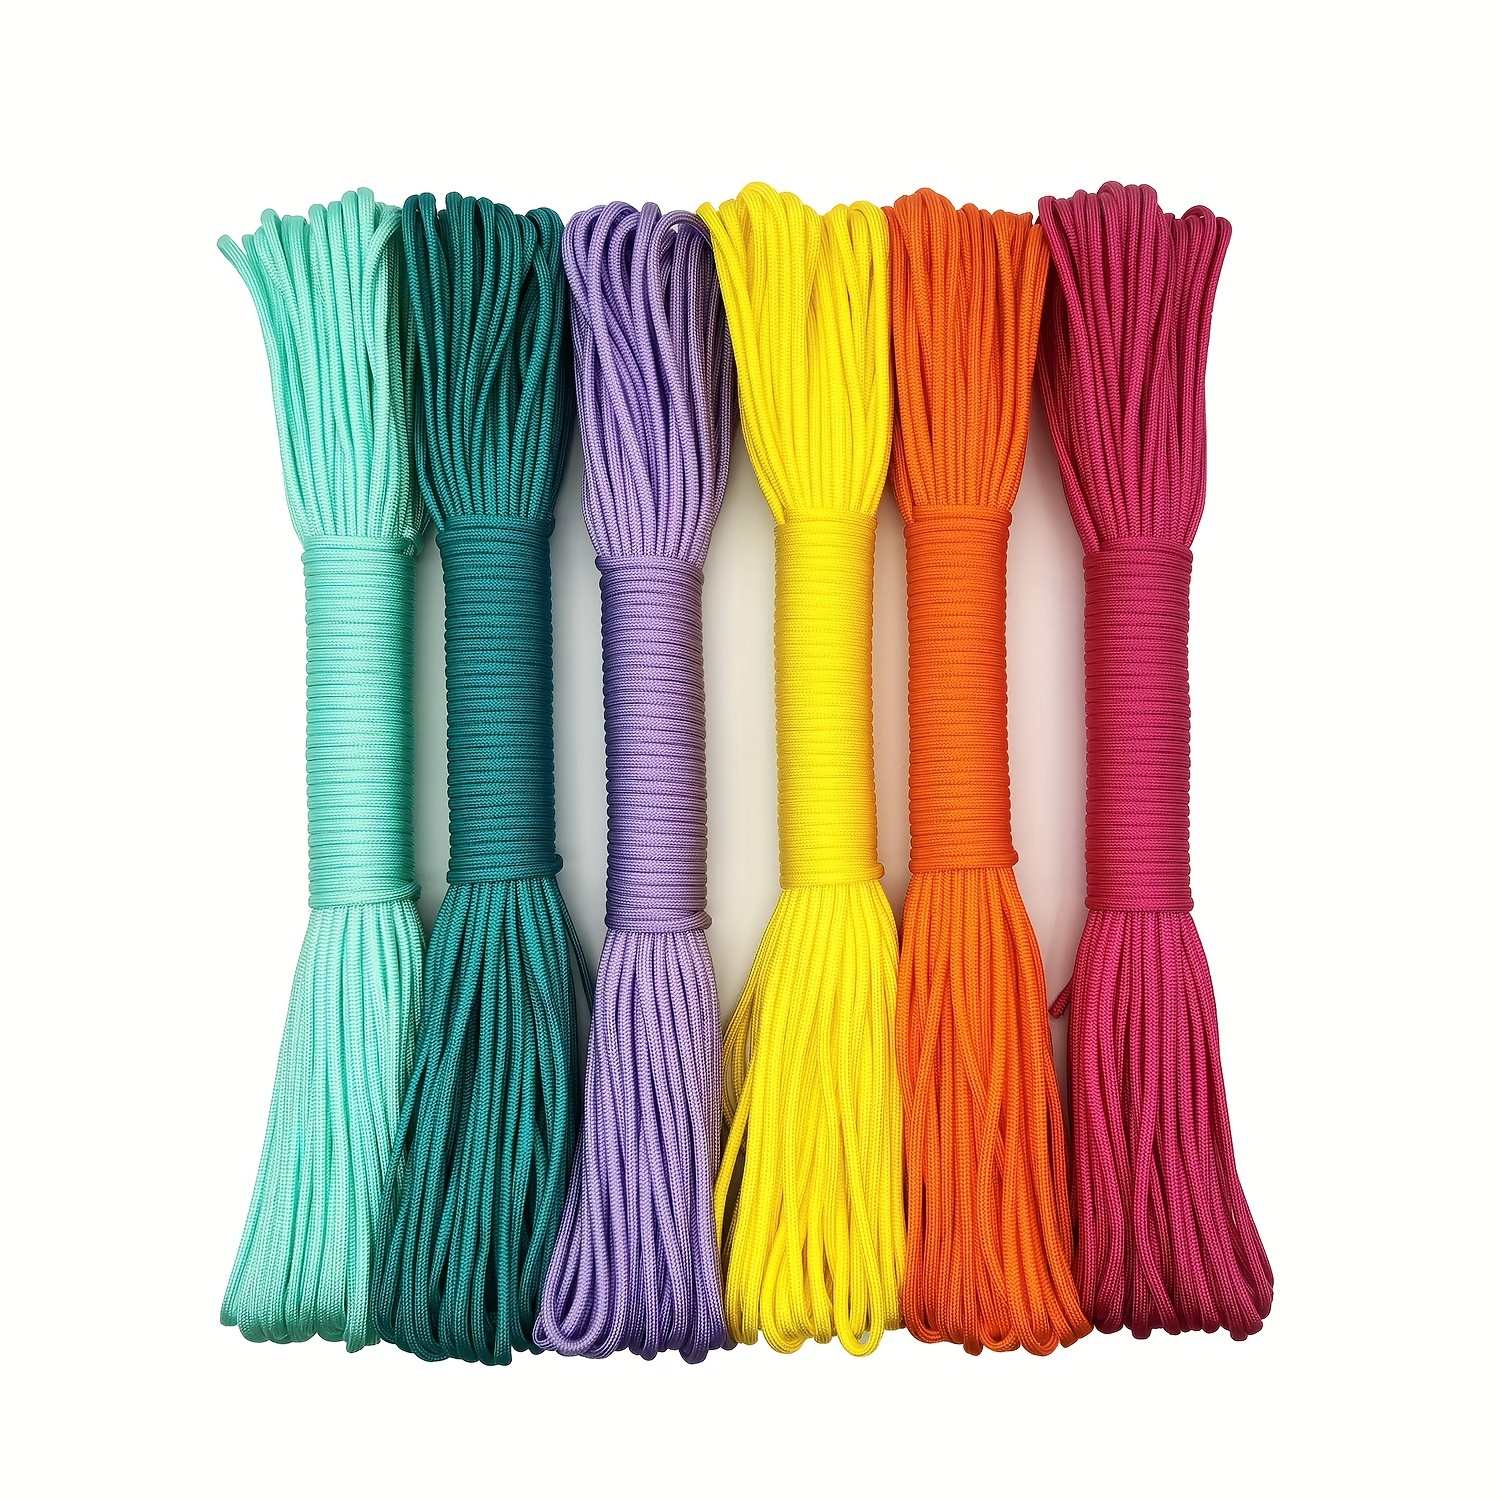 7 Core Cord Rope 4mm Diameter 5 Meters Long Perfect For Outdoor